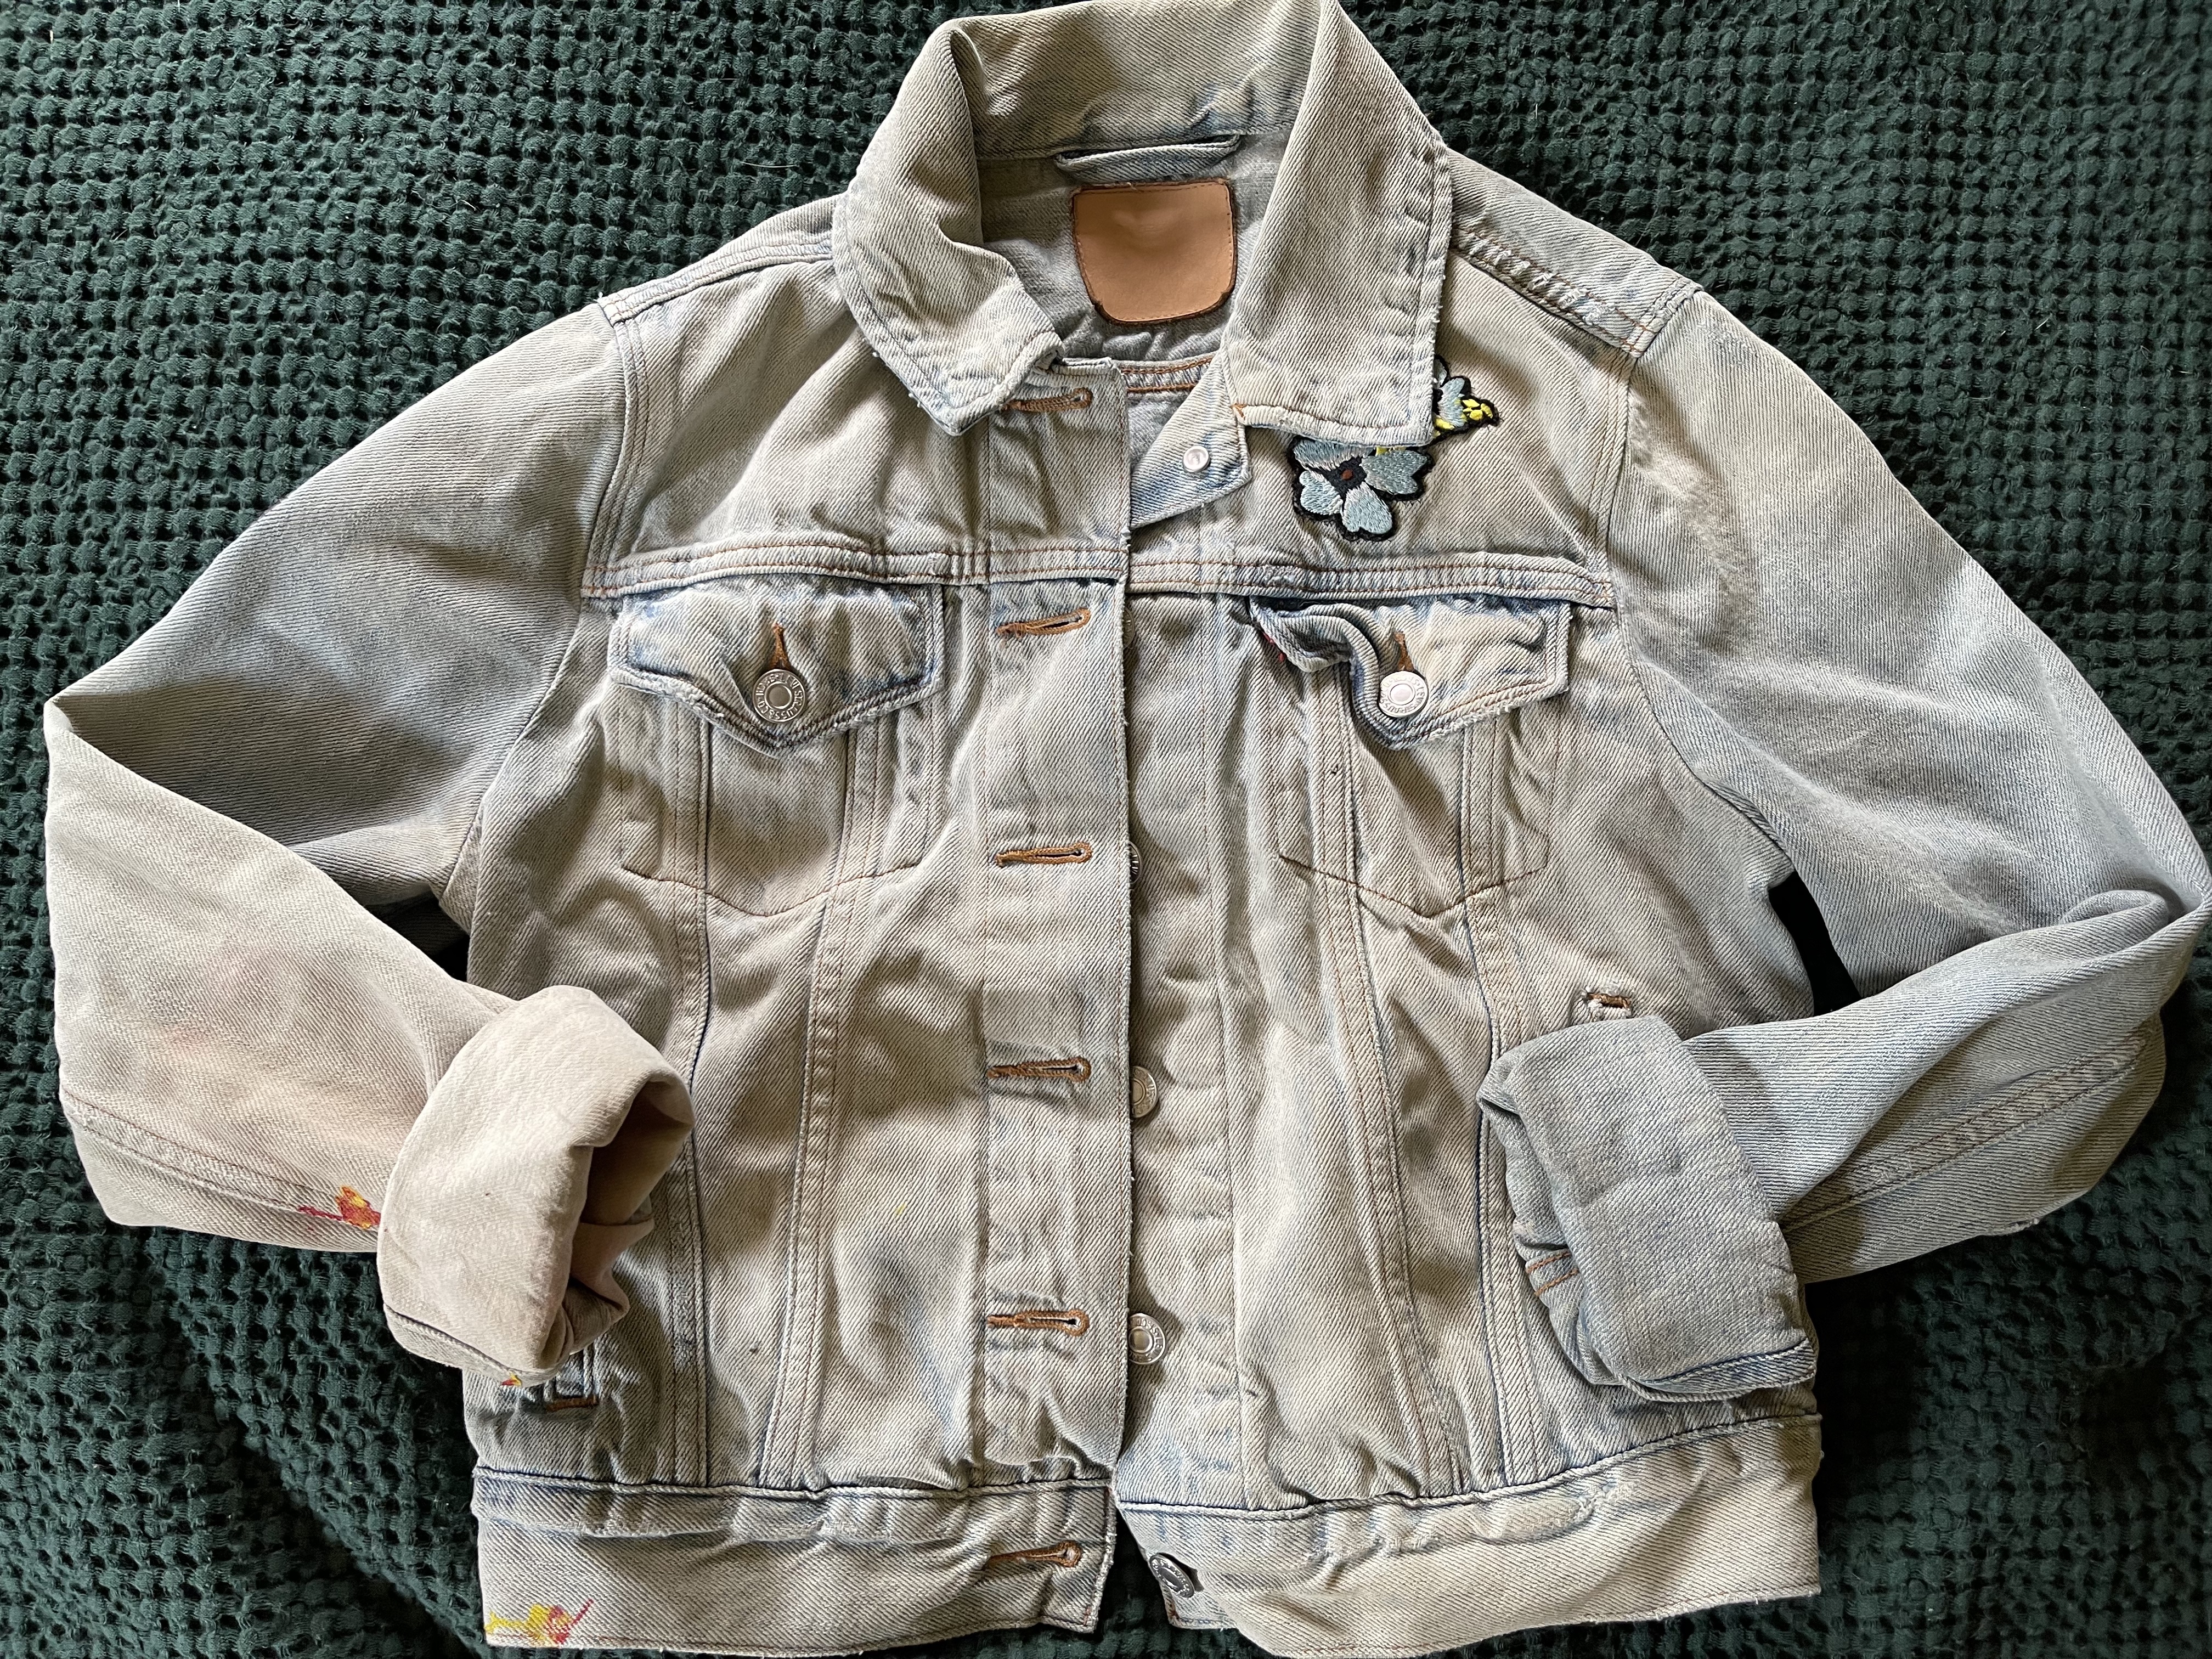 a jean jacket after it's been laundry stripped.